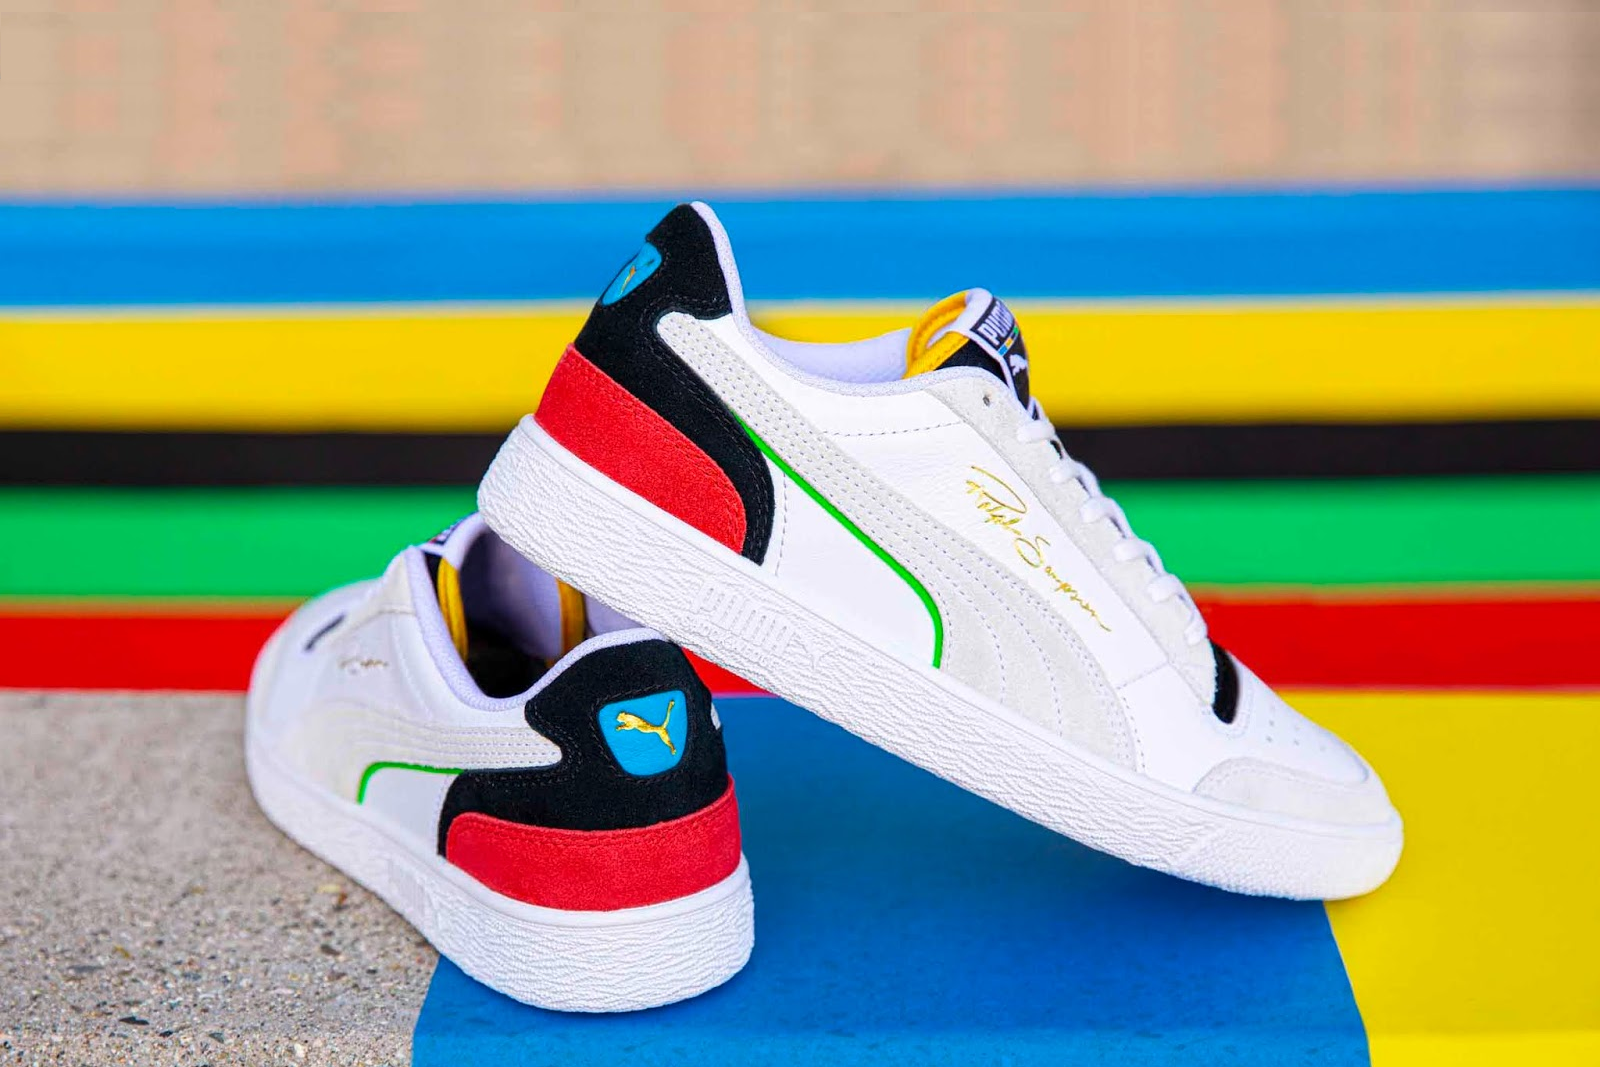 PUMA Shoes Teacher Discount for Educators and Staff.